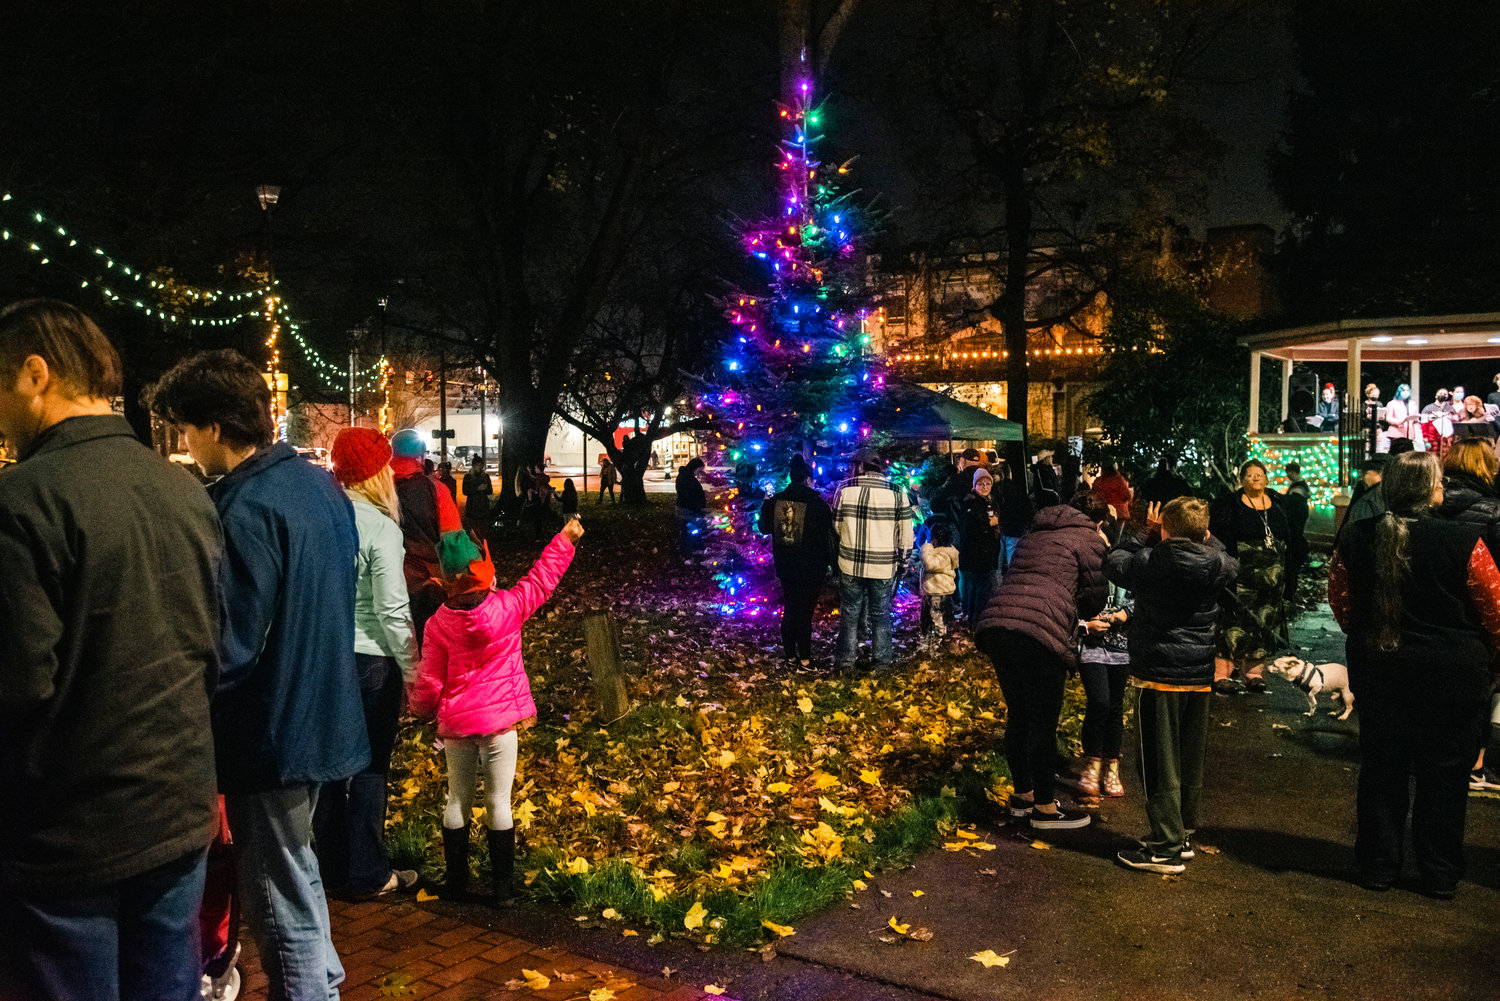 Bells ring and music is played as lights illuminate a Christmas tree and George Washington Park Friday night in Centralia.